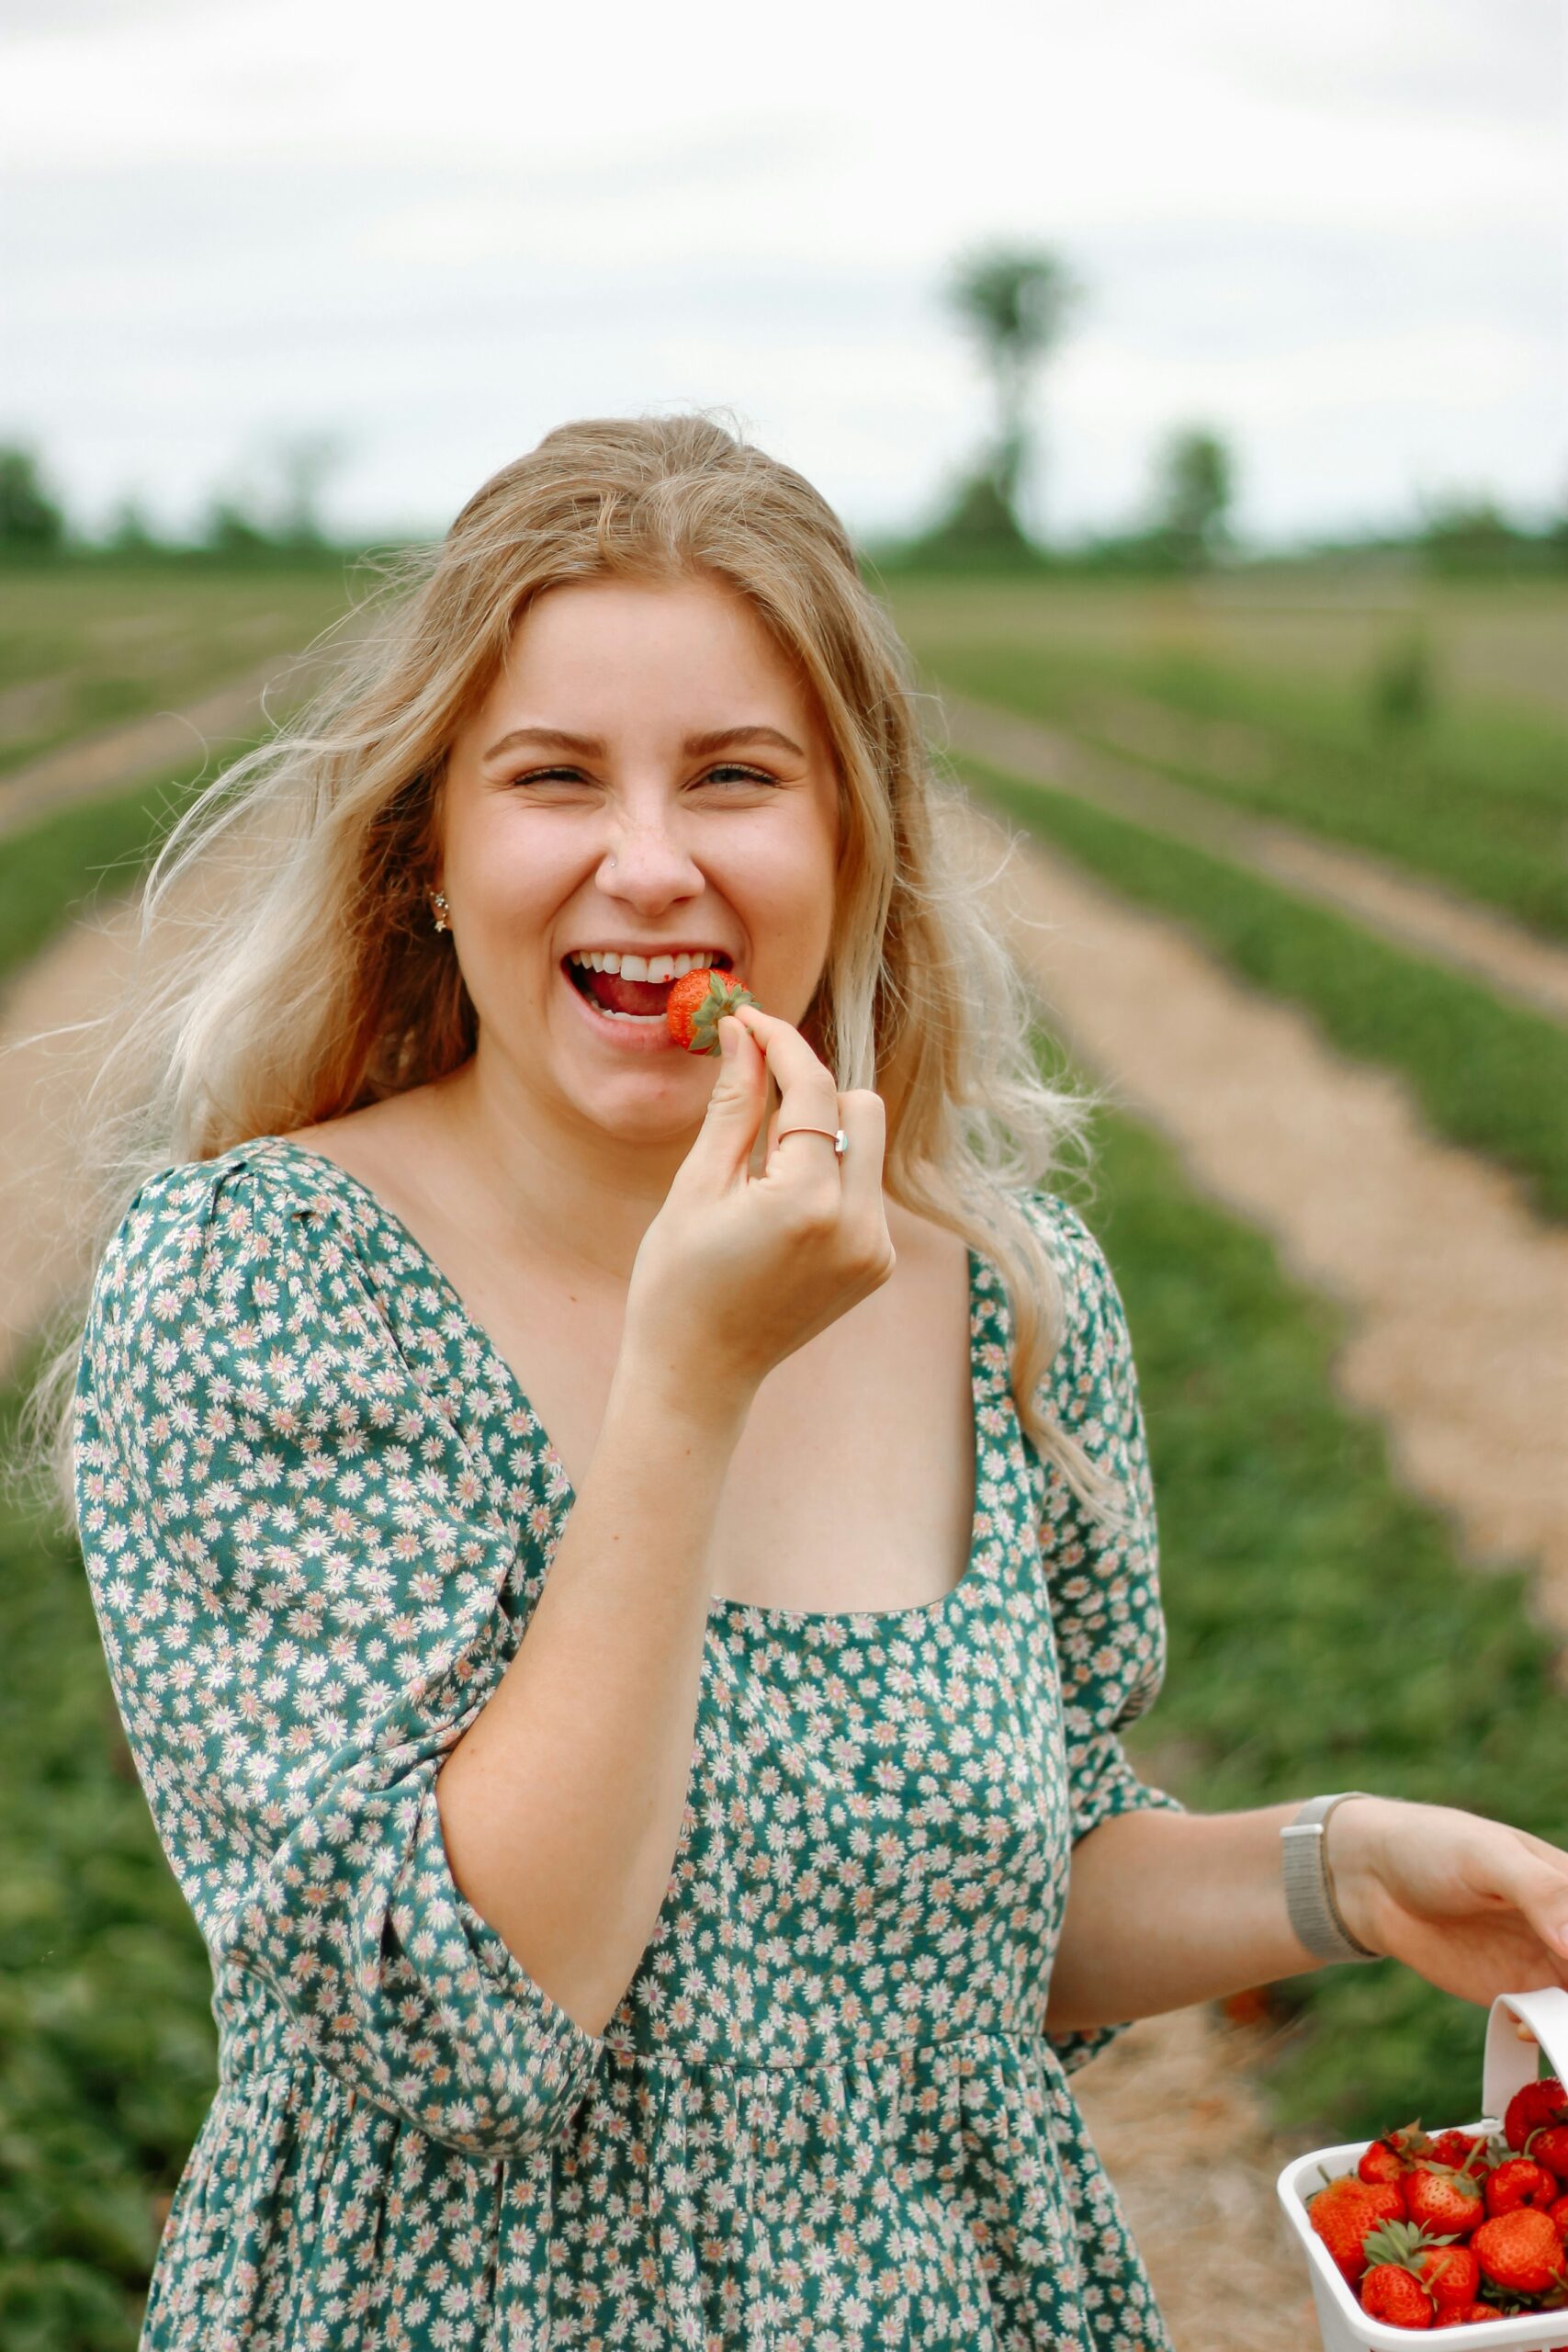 A person with long blonde hair in a green floral dress smiles and holds a strawberry to their mouth while standing in a strawberry field. They have a container of strawberries in their other hand.